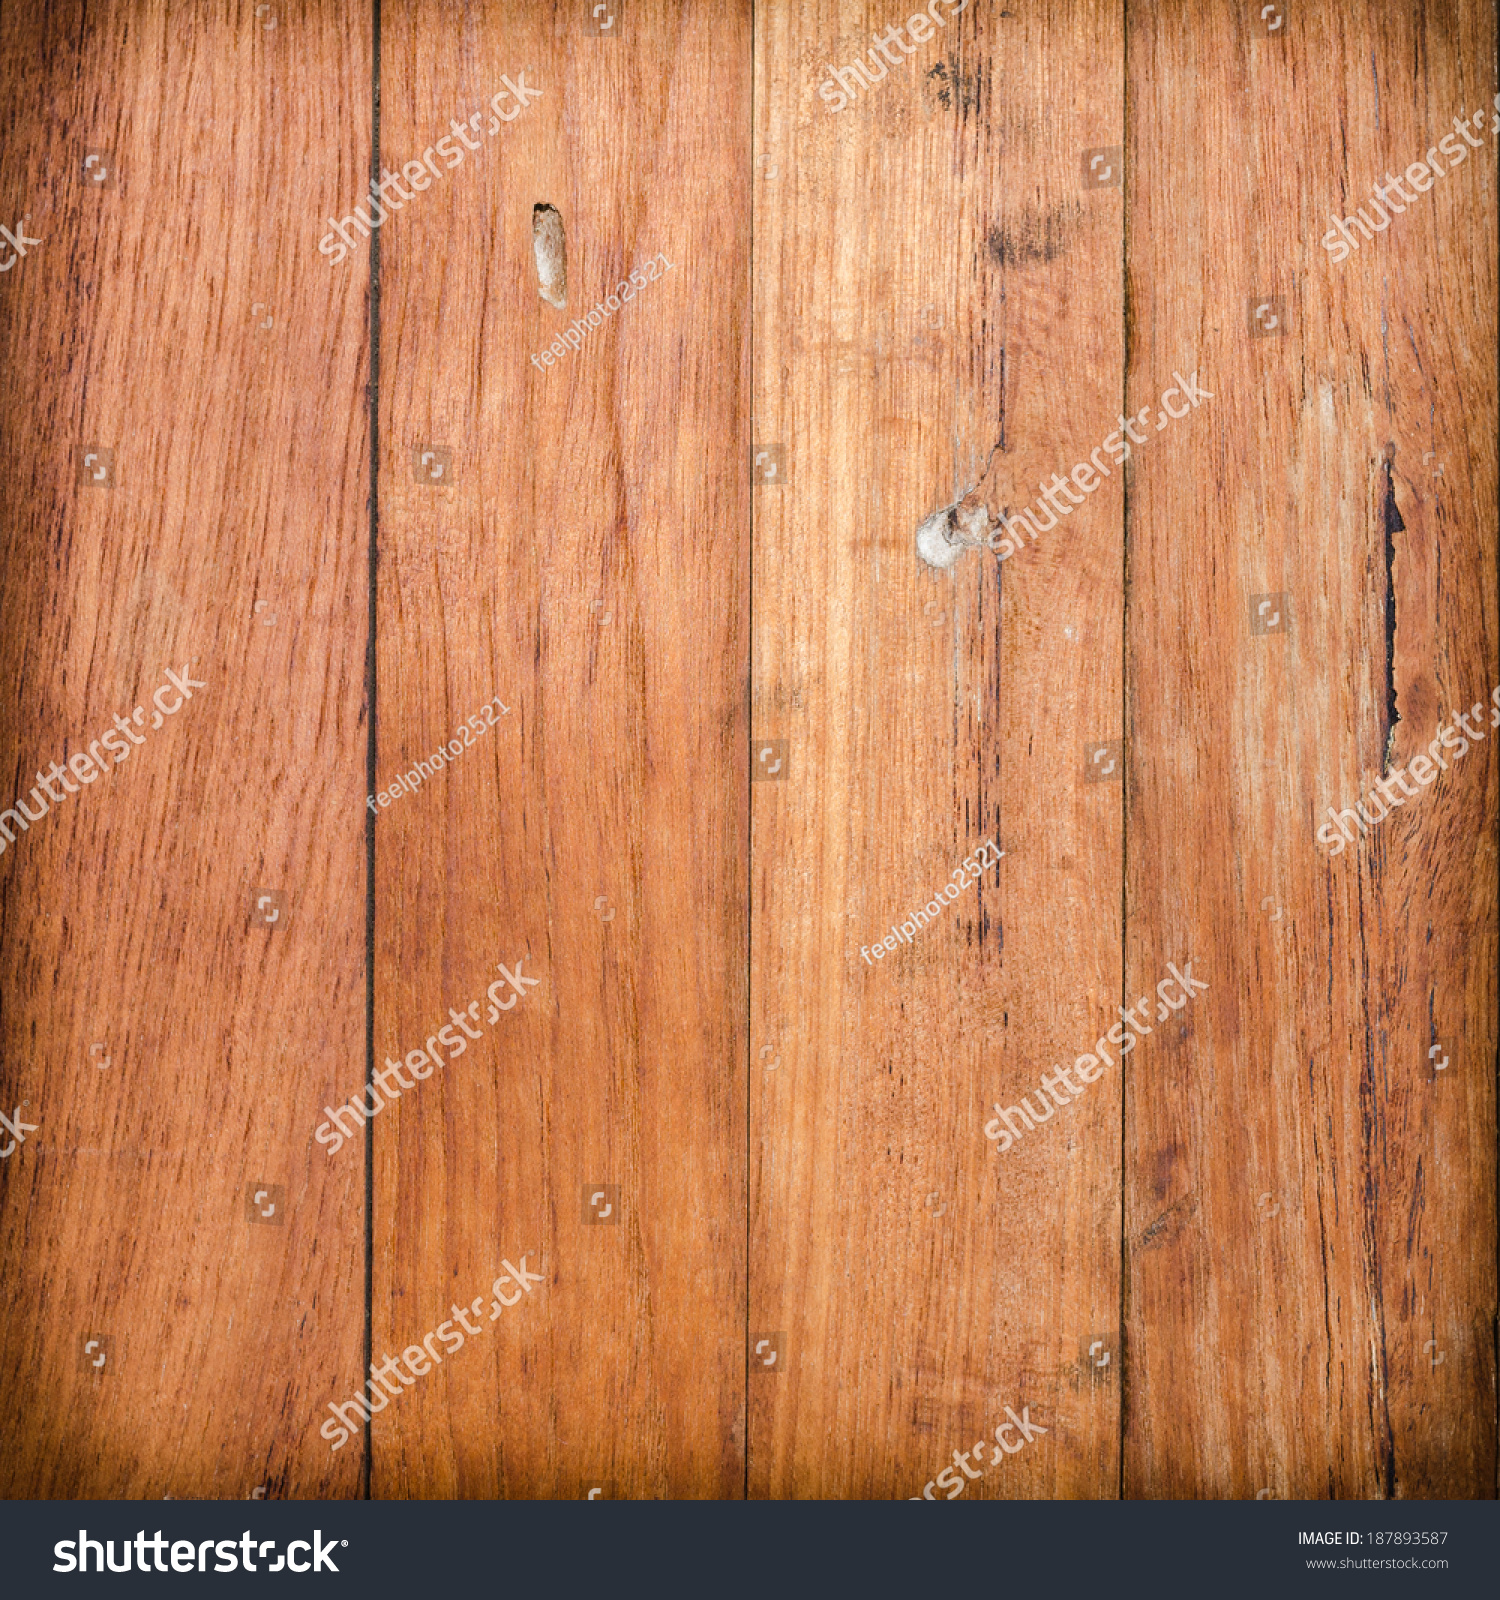 Wooden wall background or texture #187893587